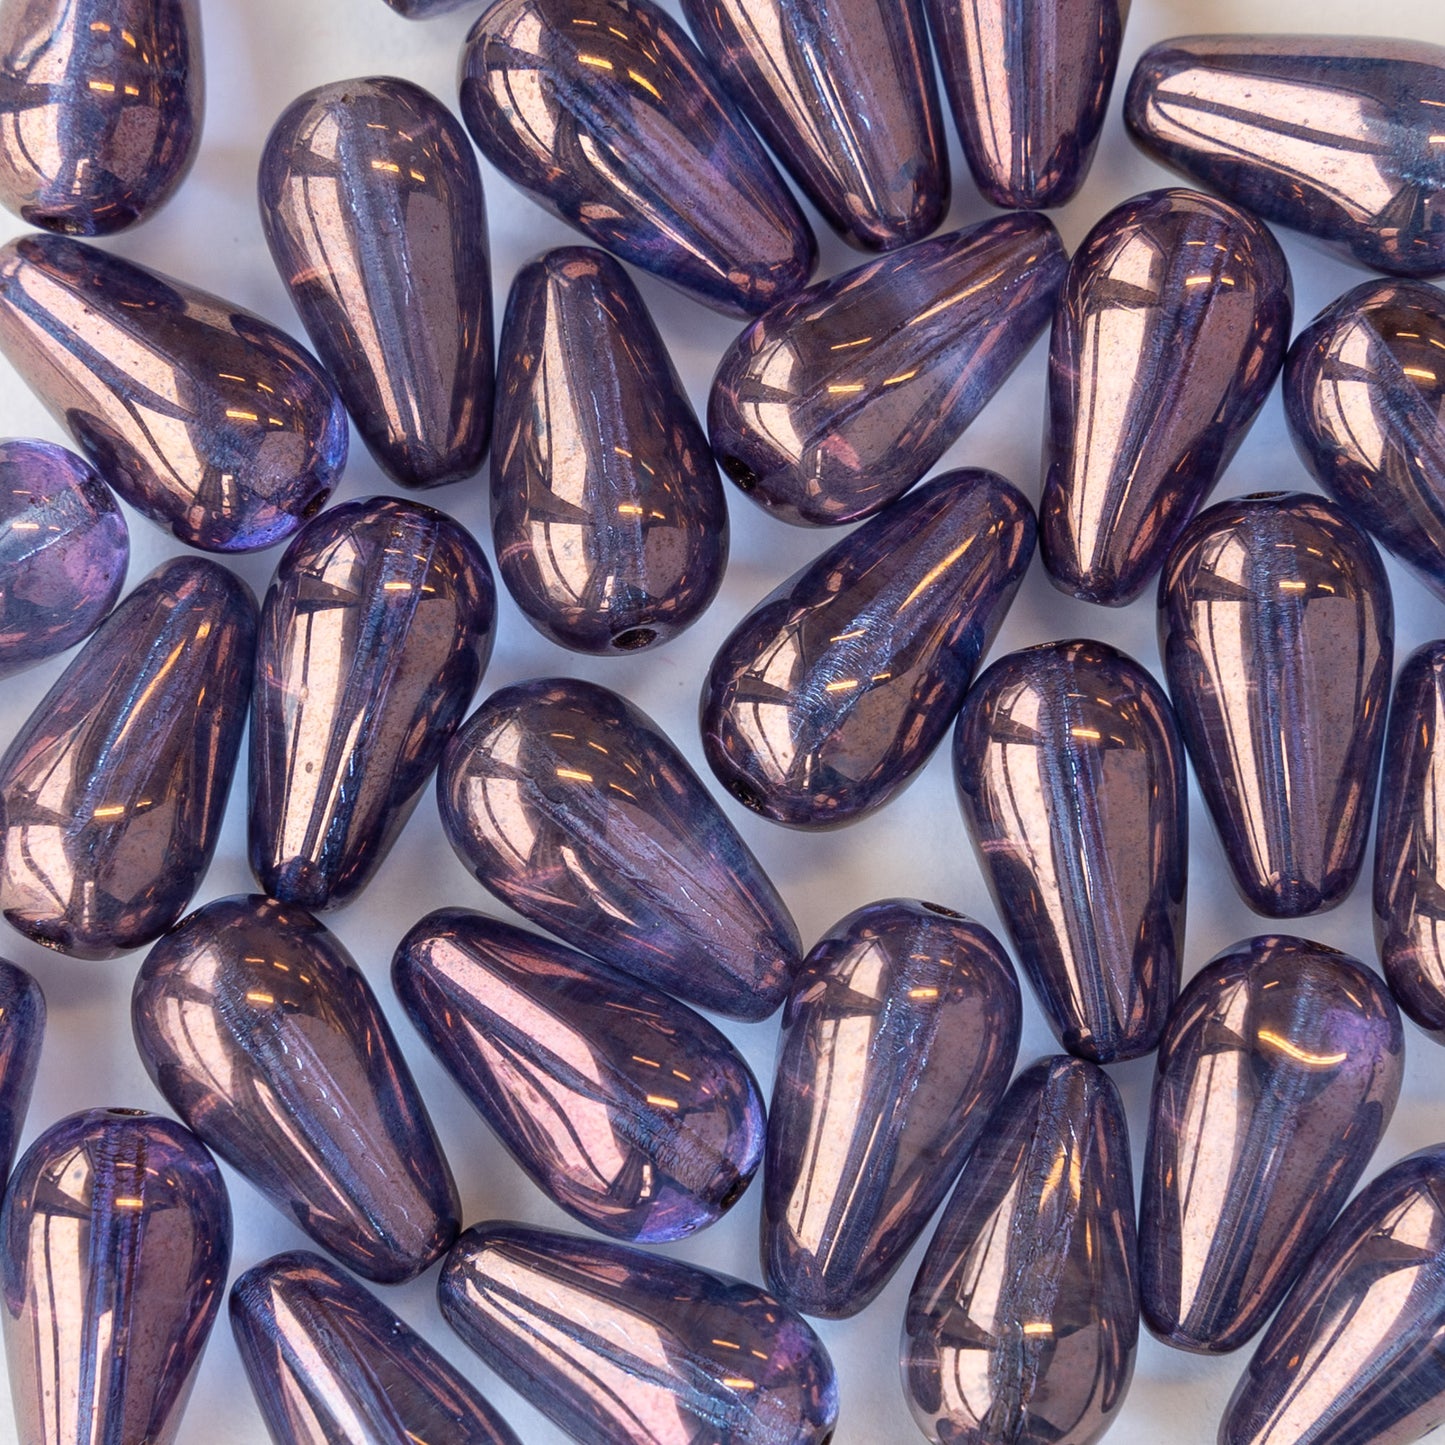 15x8mm Long Drilled Drops - Amethyst Luster - 20 Beads